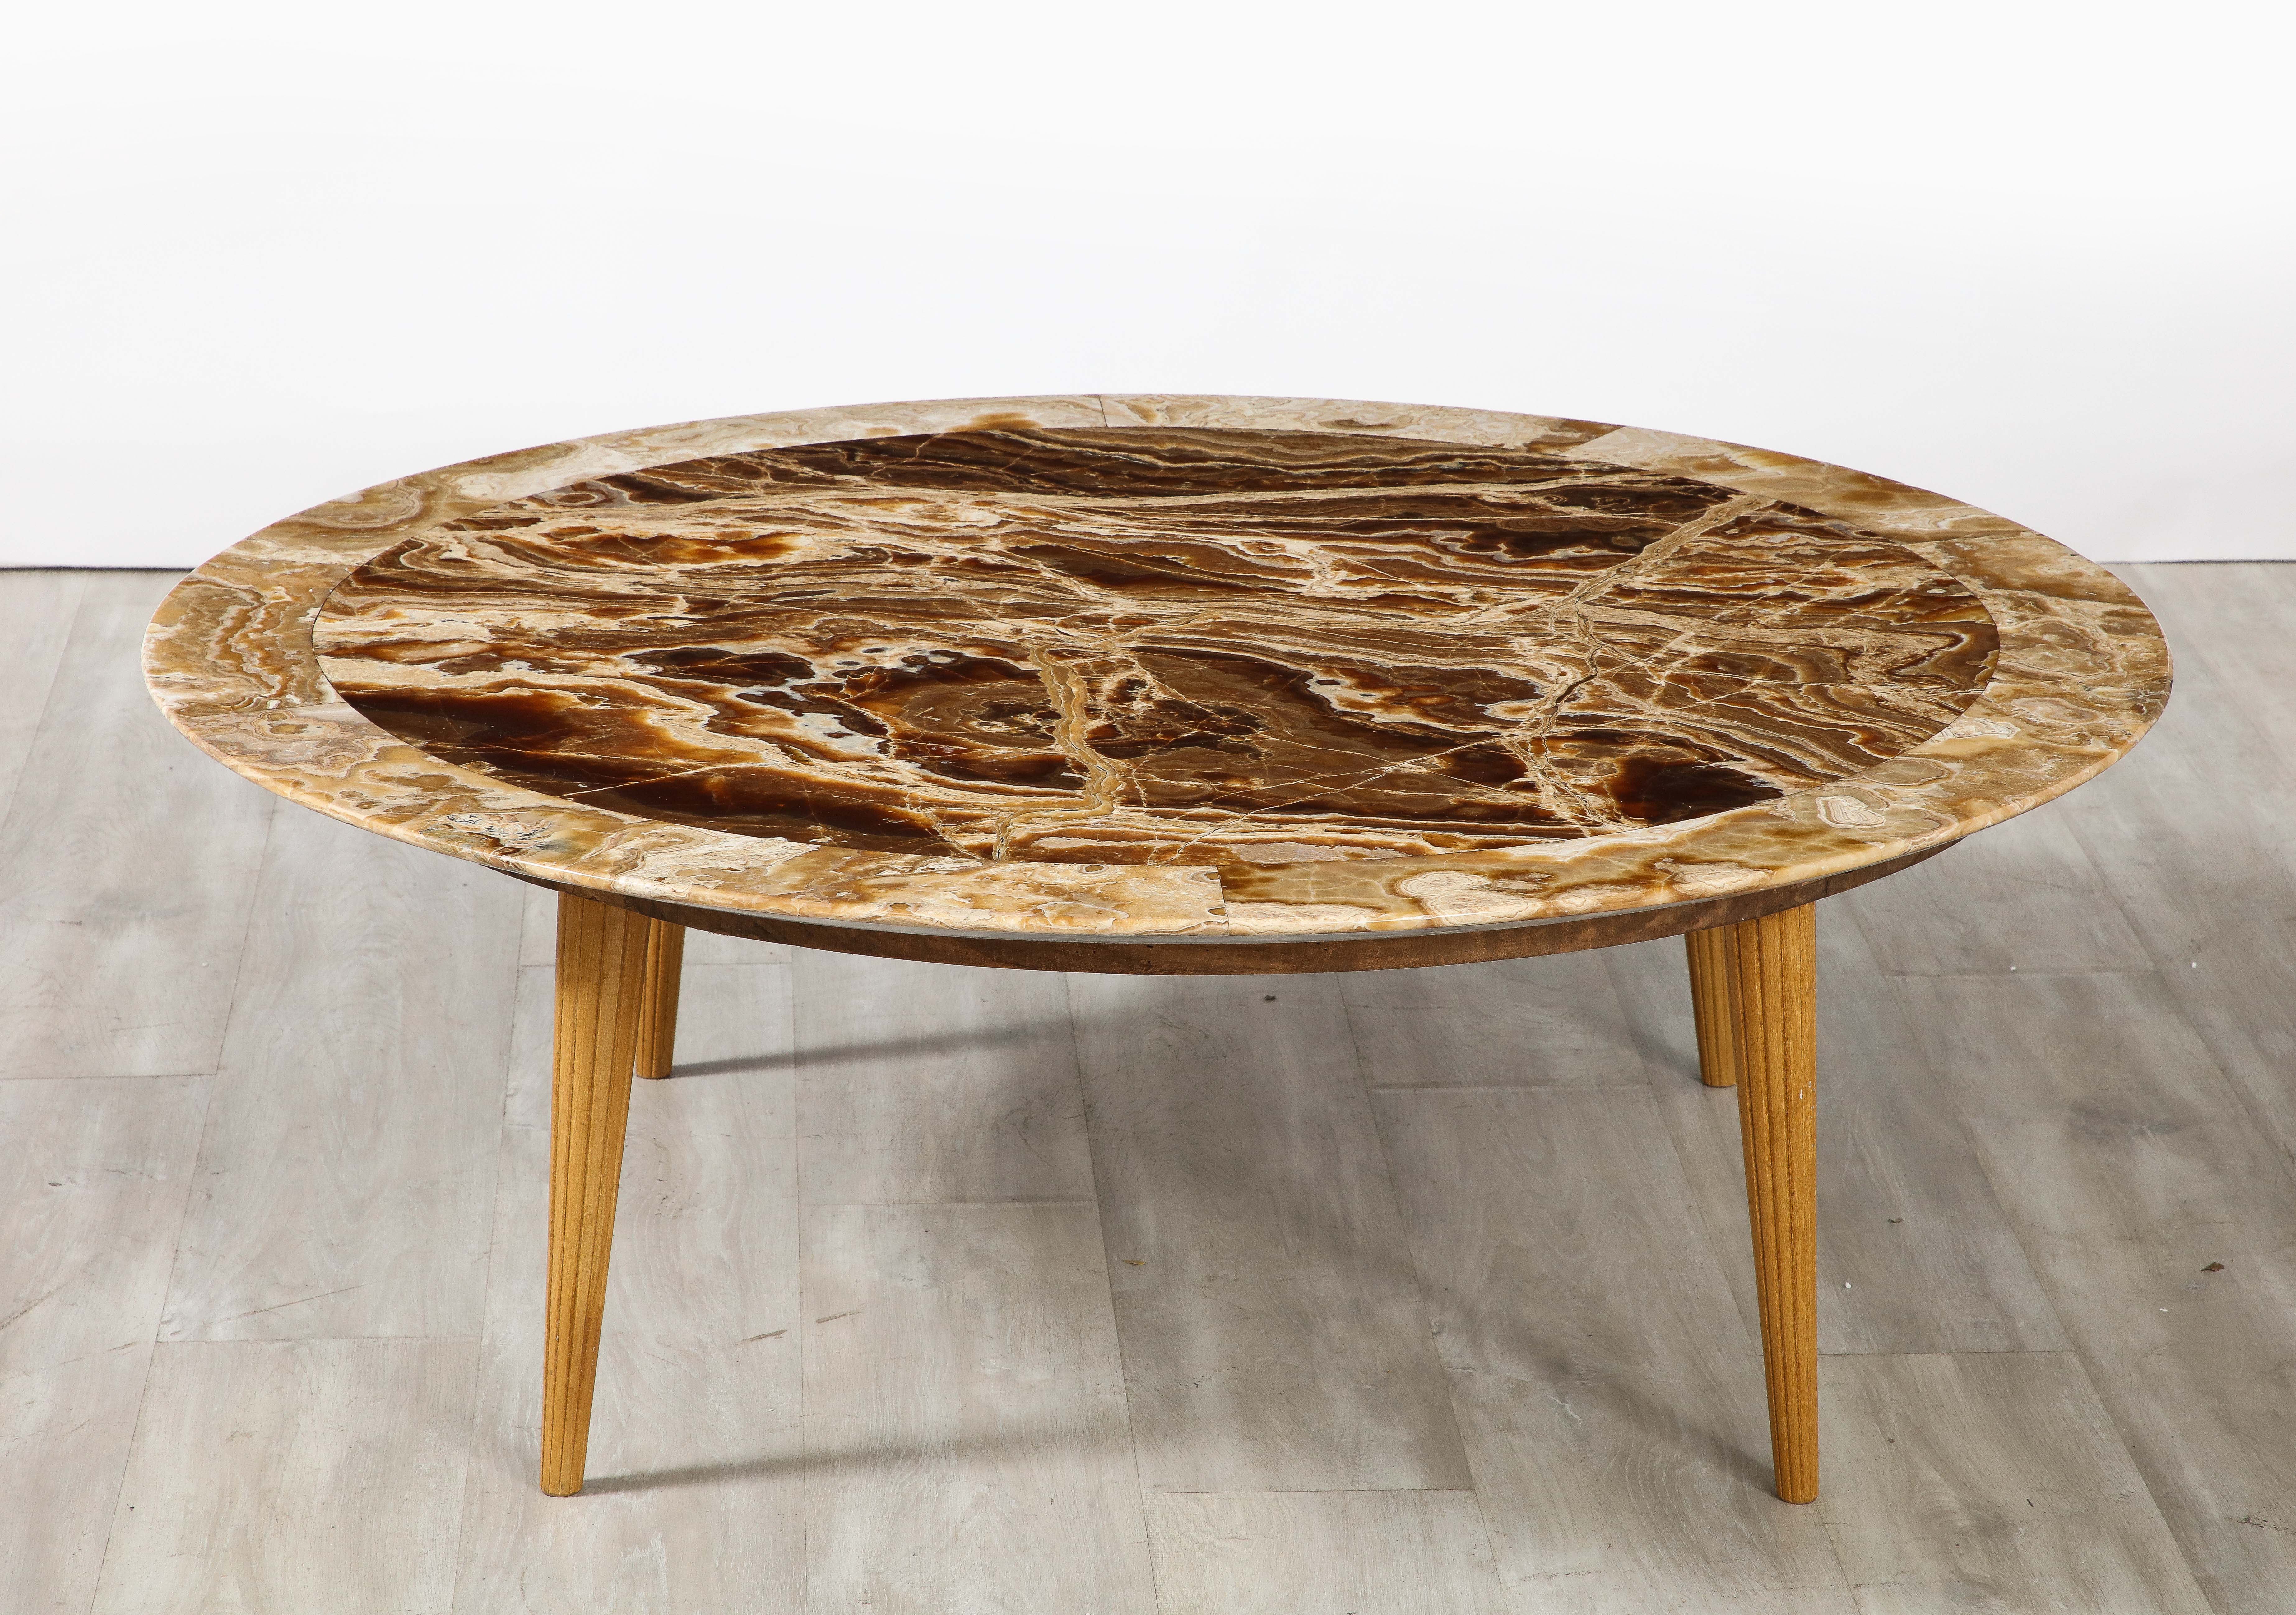 Italian 1960's grand circular coffee table, the top in a spectacular agate, with the outer border being a lighter coloration which highlights the central section and oak legs wonderfully.  The top rests upon four fluted and tapered oak legs.  The